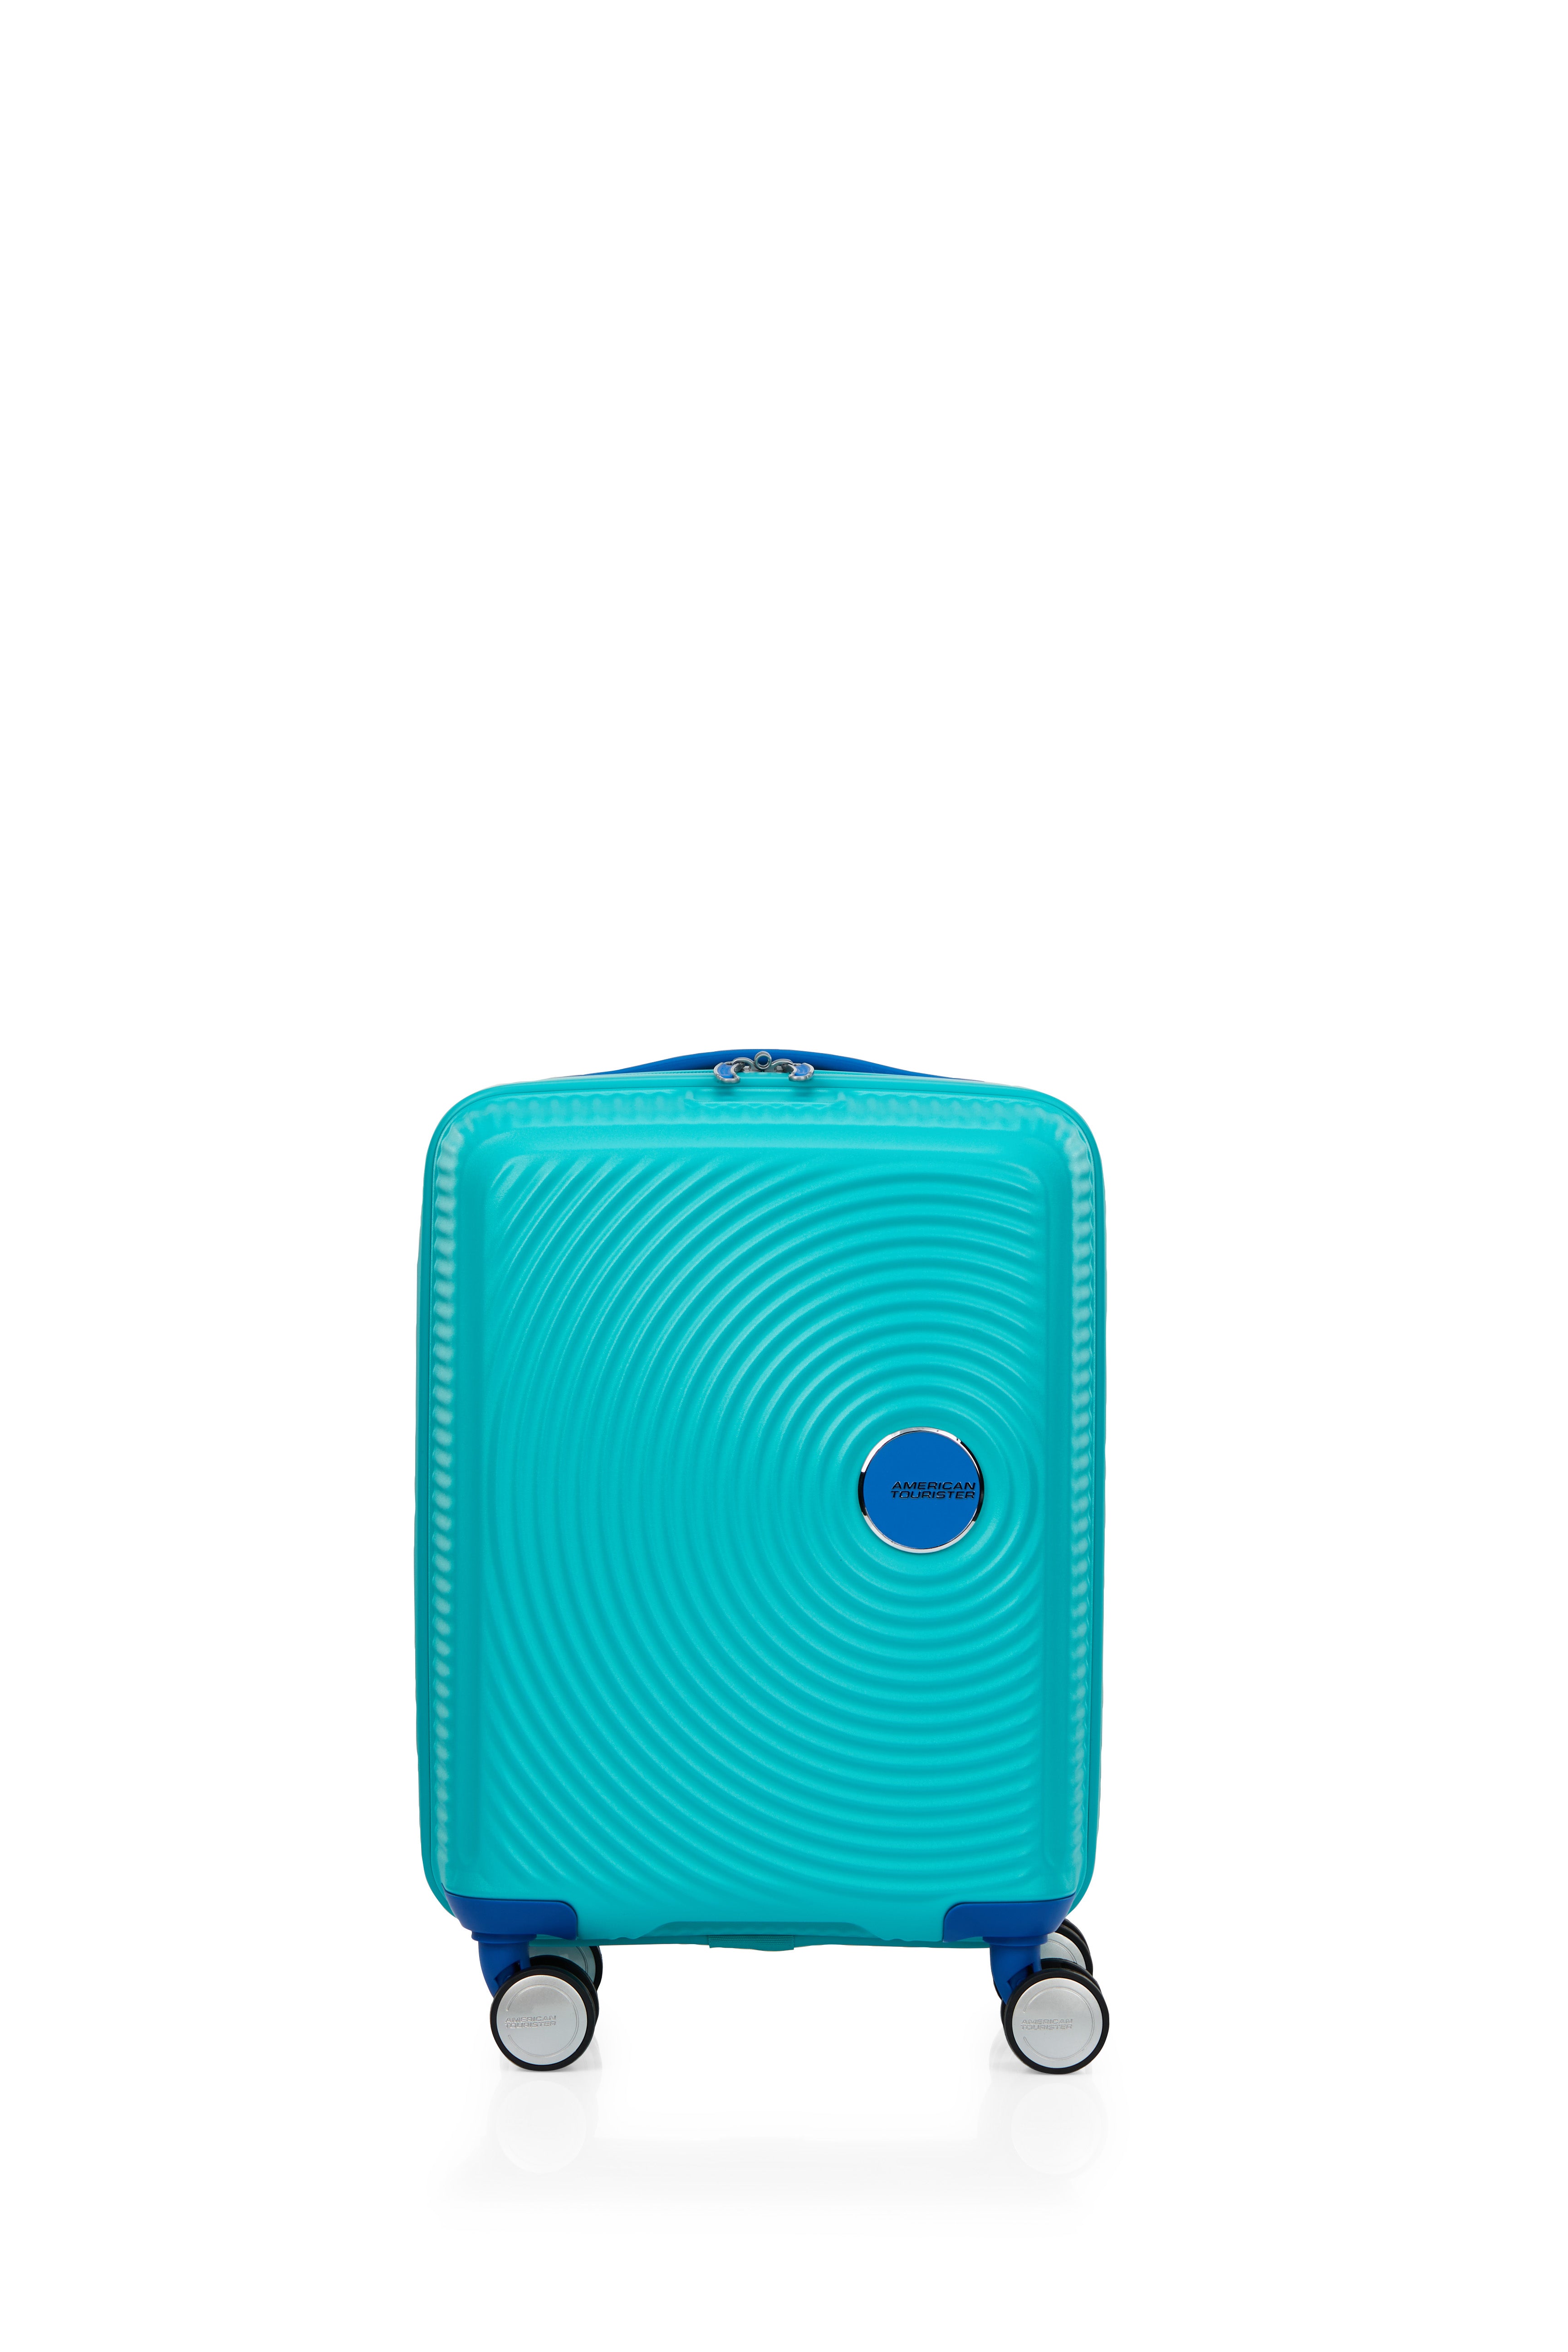 American Tourister - Little Curio 47cm Spinner - Teal/Blue-1